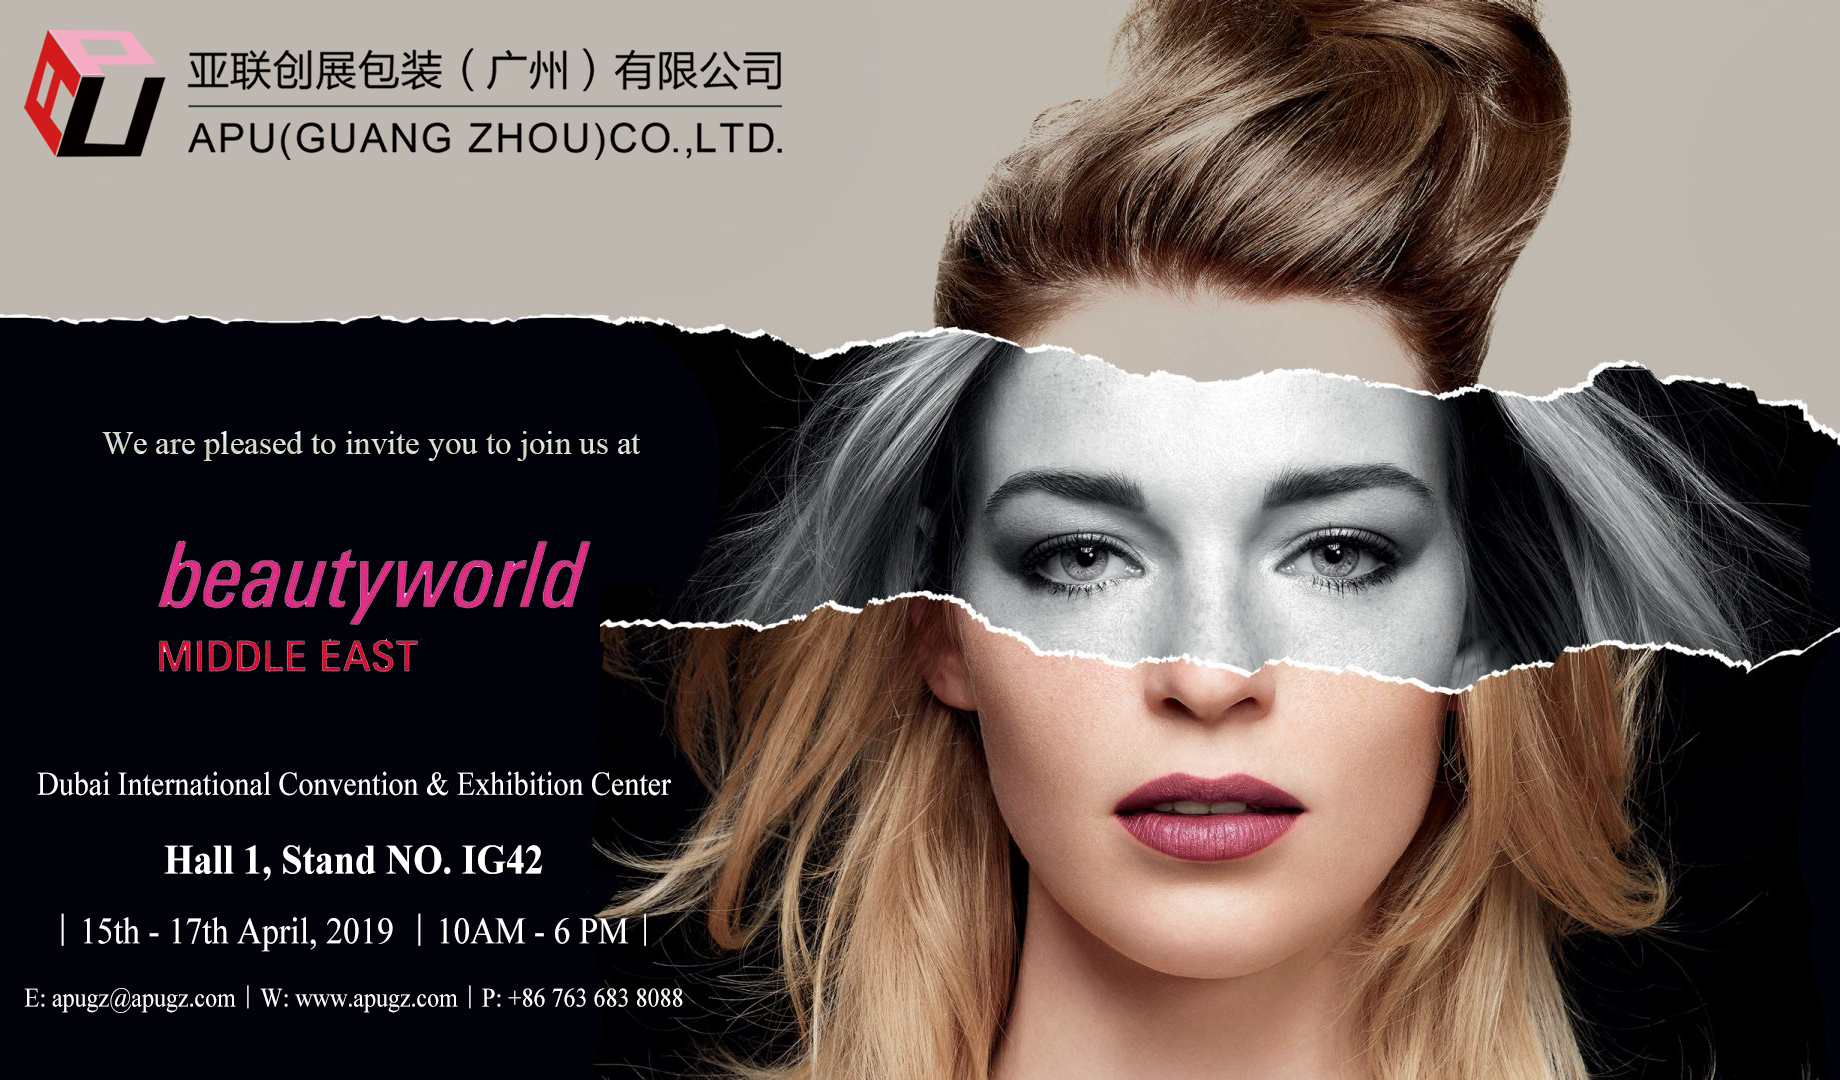 See you in Beautyworld Middle East 2019!